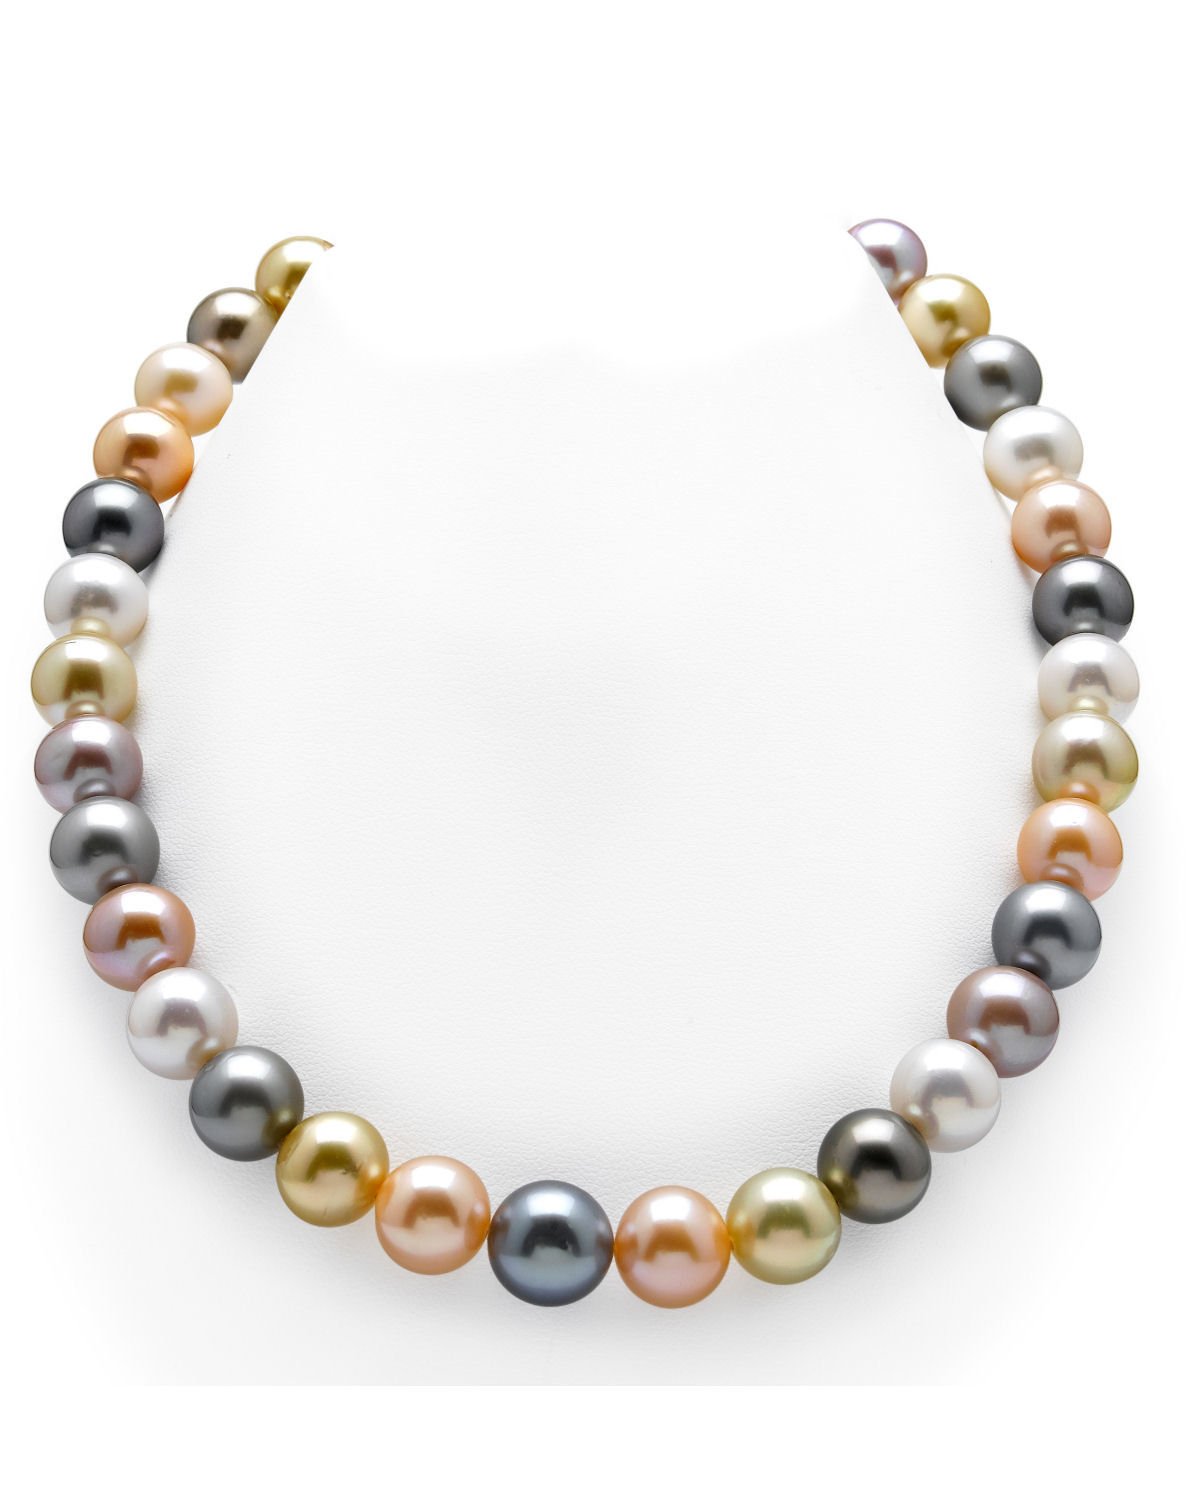 Multi-Color Tahitian, Golden South Sea & Freshwater Pearl Necklace, 10.0-12.0mm - AAA Quality 18 Princess Length / Ball Clasp - 14K Yellow Gold